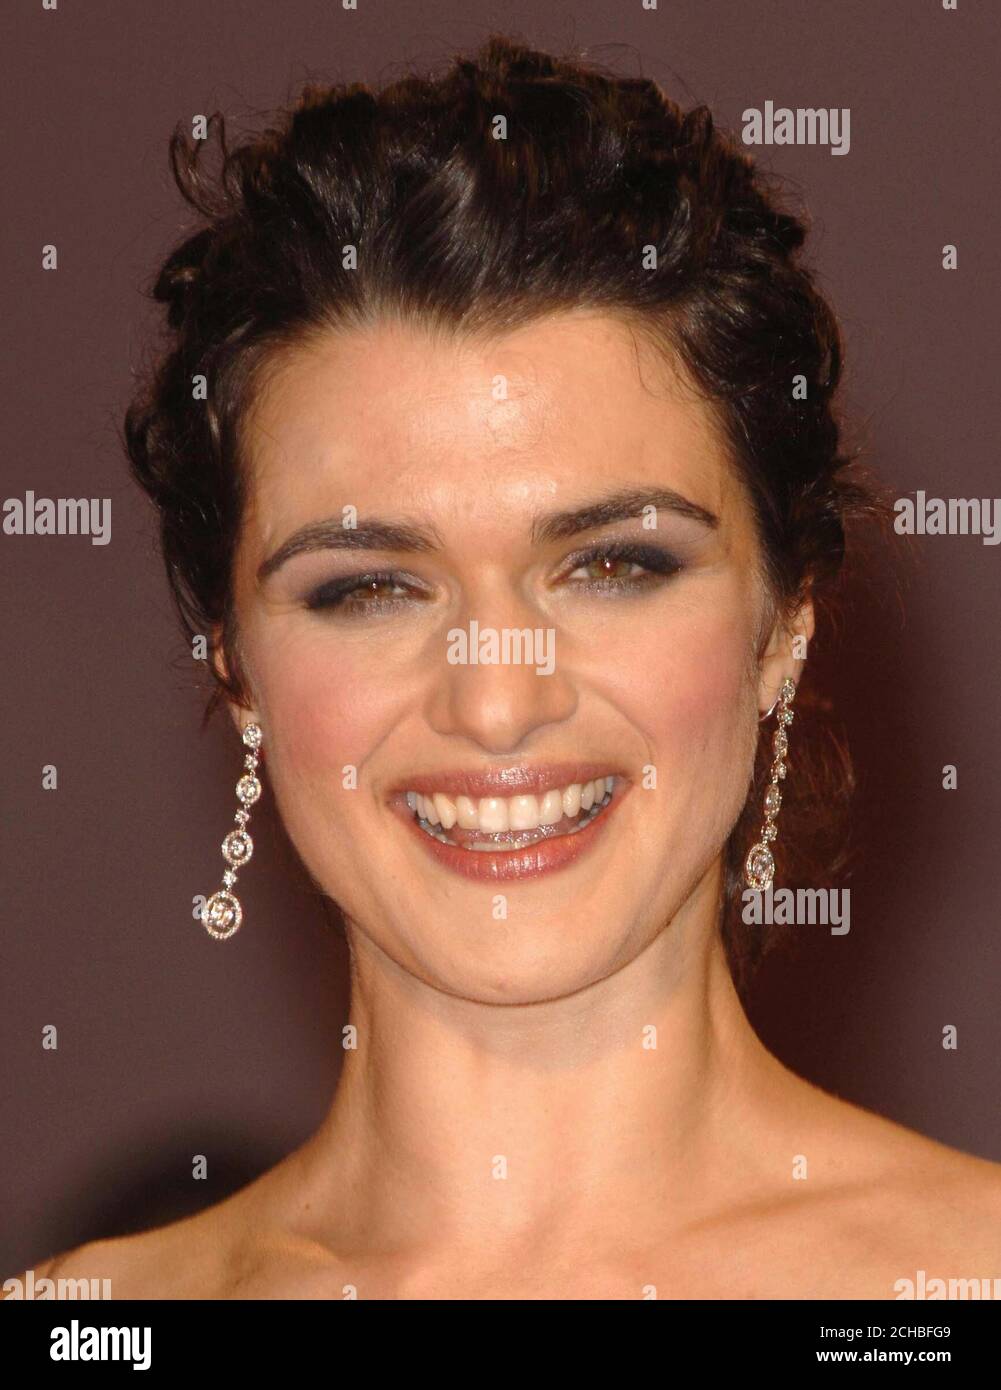 CAPTION CORRECTION - Best Supporting Actress PA File image dated 31-08-2005 showing Rachel Weisz, who has just been nominated for Best Supporting Actress for the forthcoming Academy Awards for her role in 'The Constant Gardener', London, Tuesday 31 January 2006. PRESS ASSOCIATION photo. Photo Credit should read: Ian West/PA.  Stock Photo